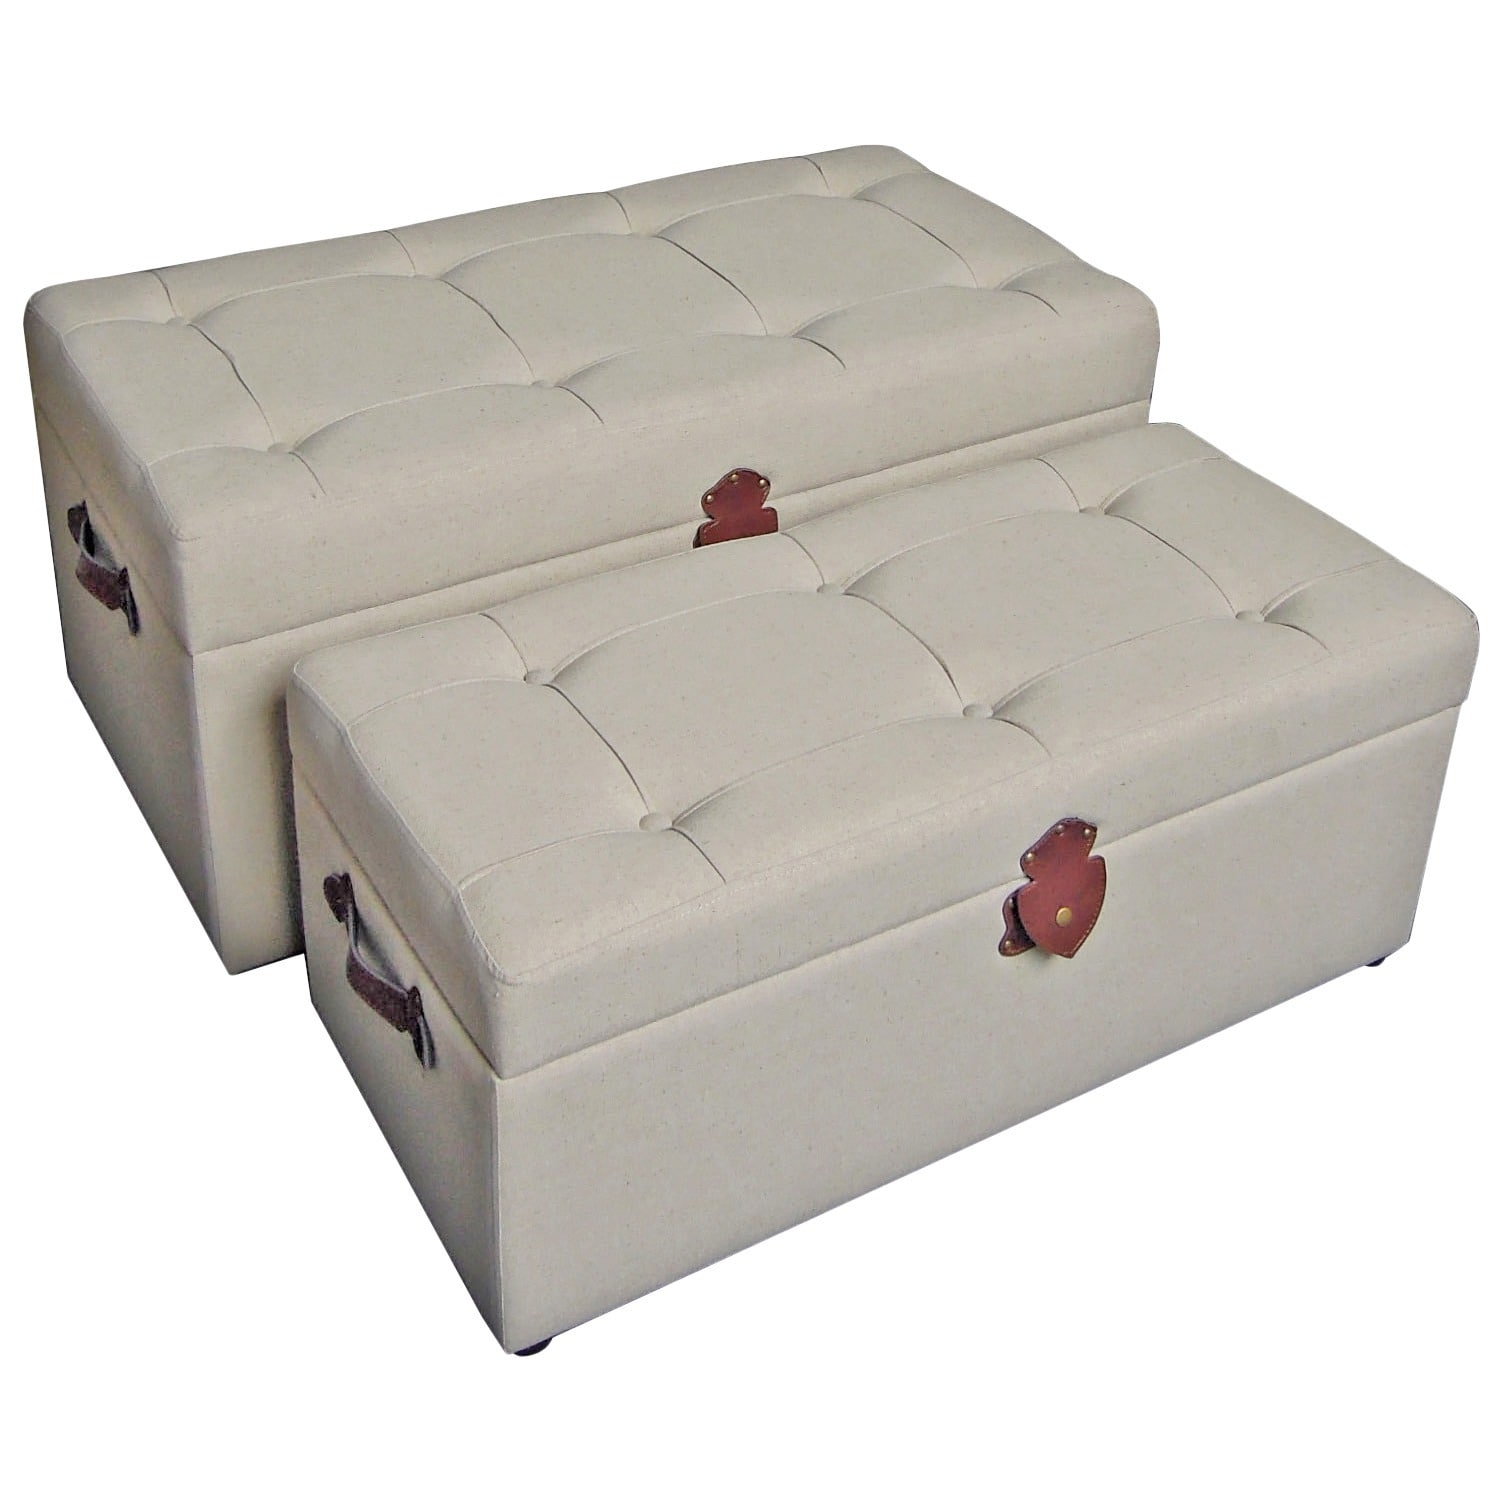 Tufted Fabric Trunks/ Benches (Set of 2) Today $340.99 Sale $306.89